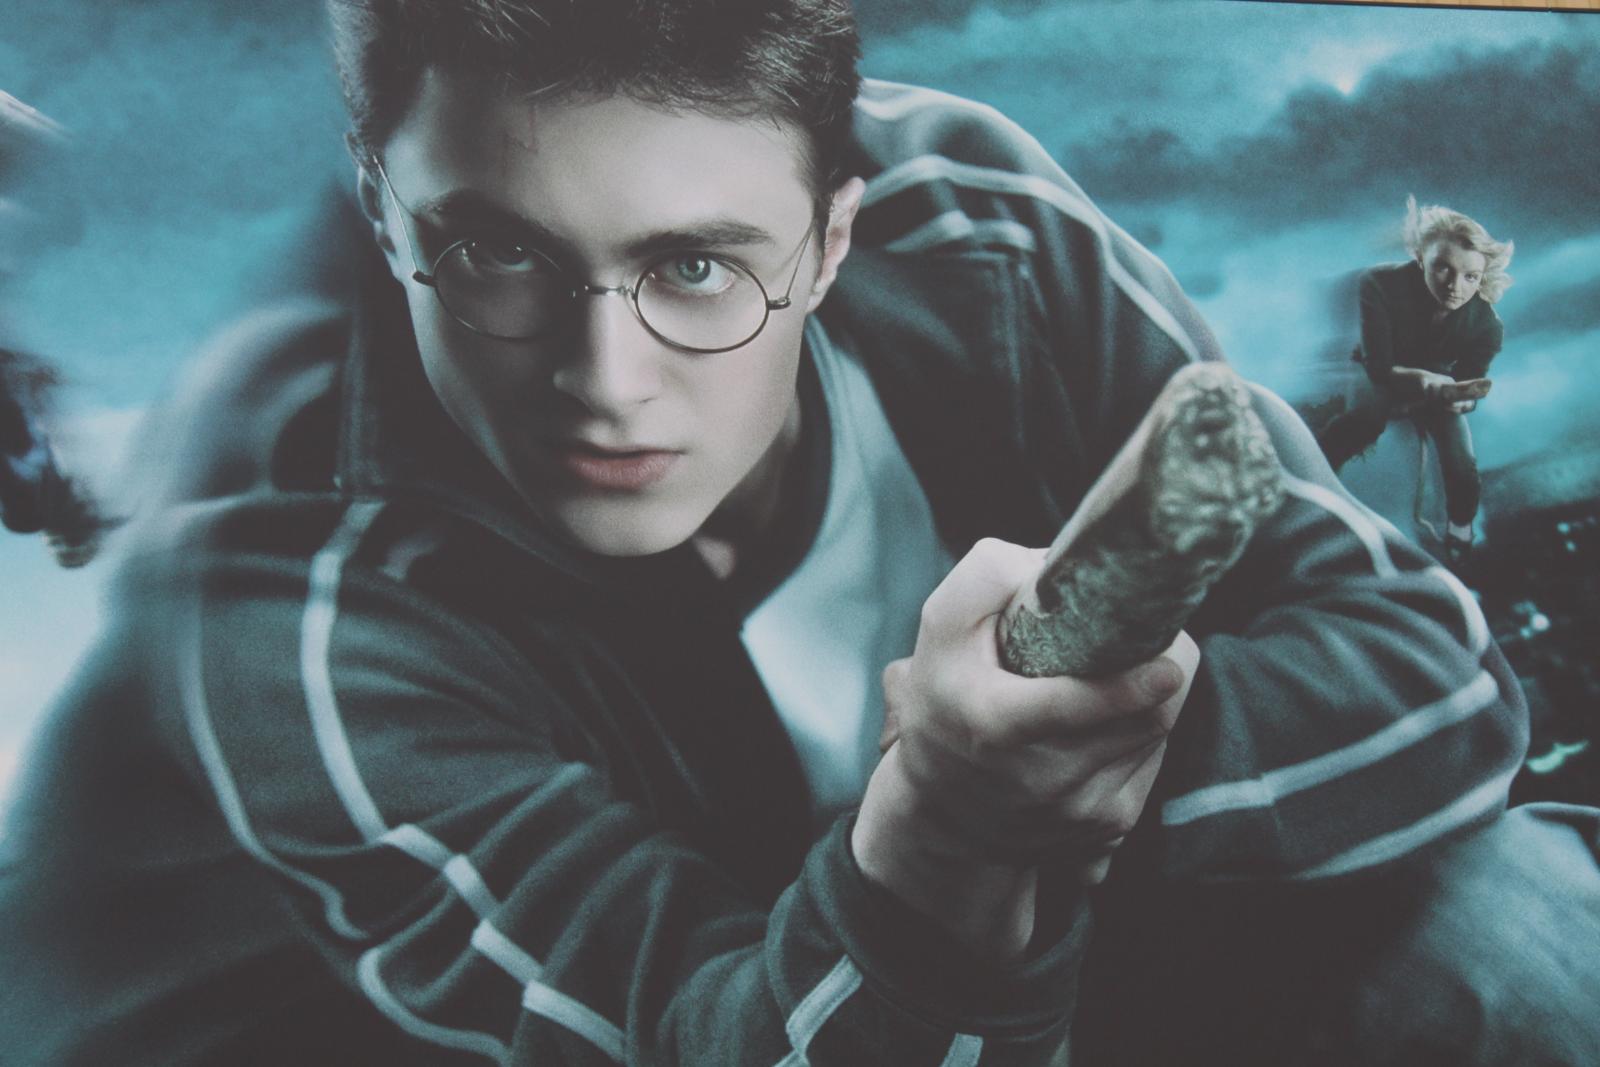 Daniel Radcliffe in the character of Harry Potter is flying on a broomstick.